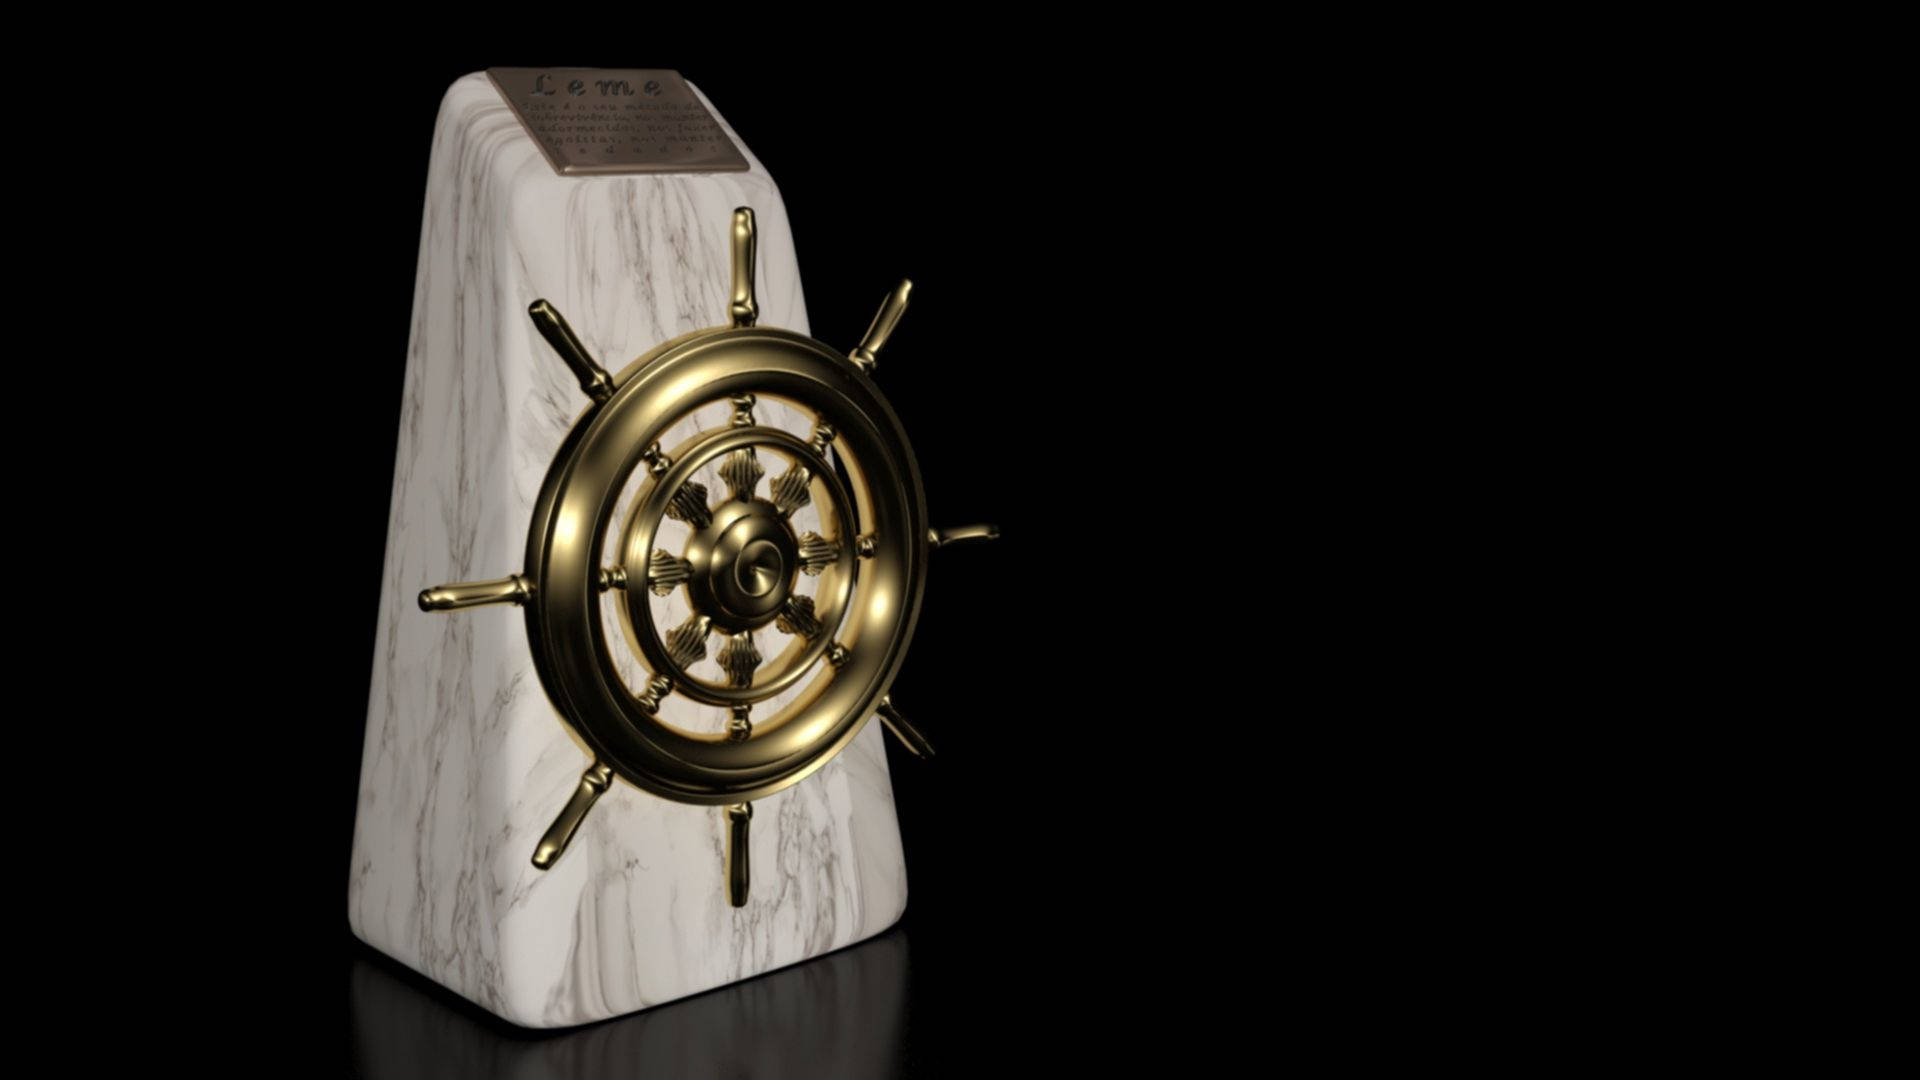 Navigate the Ocean with a 3D Ship Steering Wheel Wallpaper